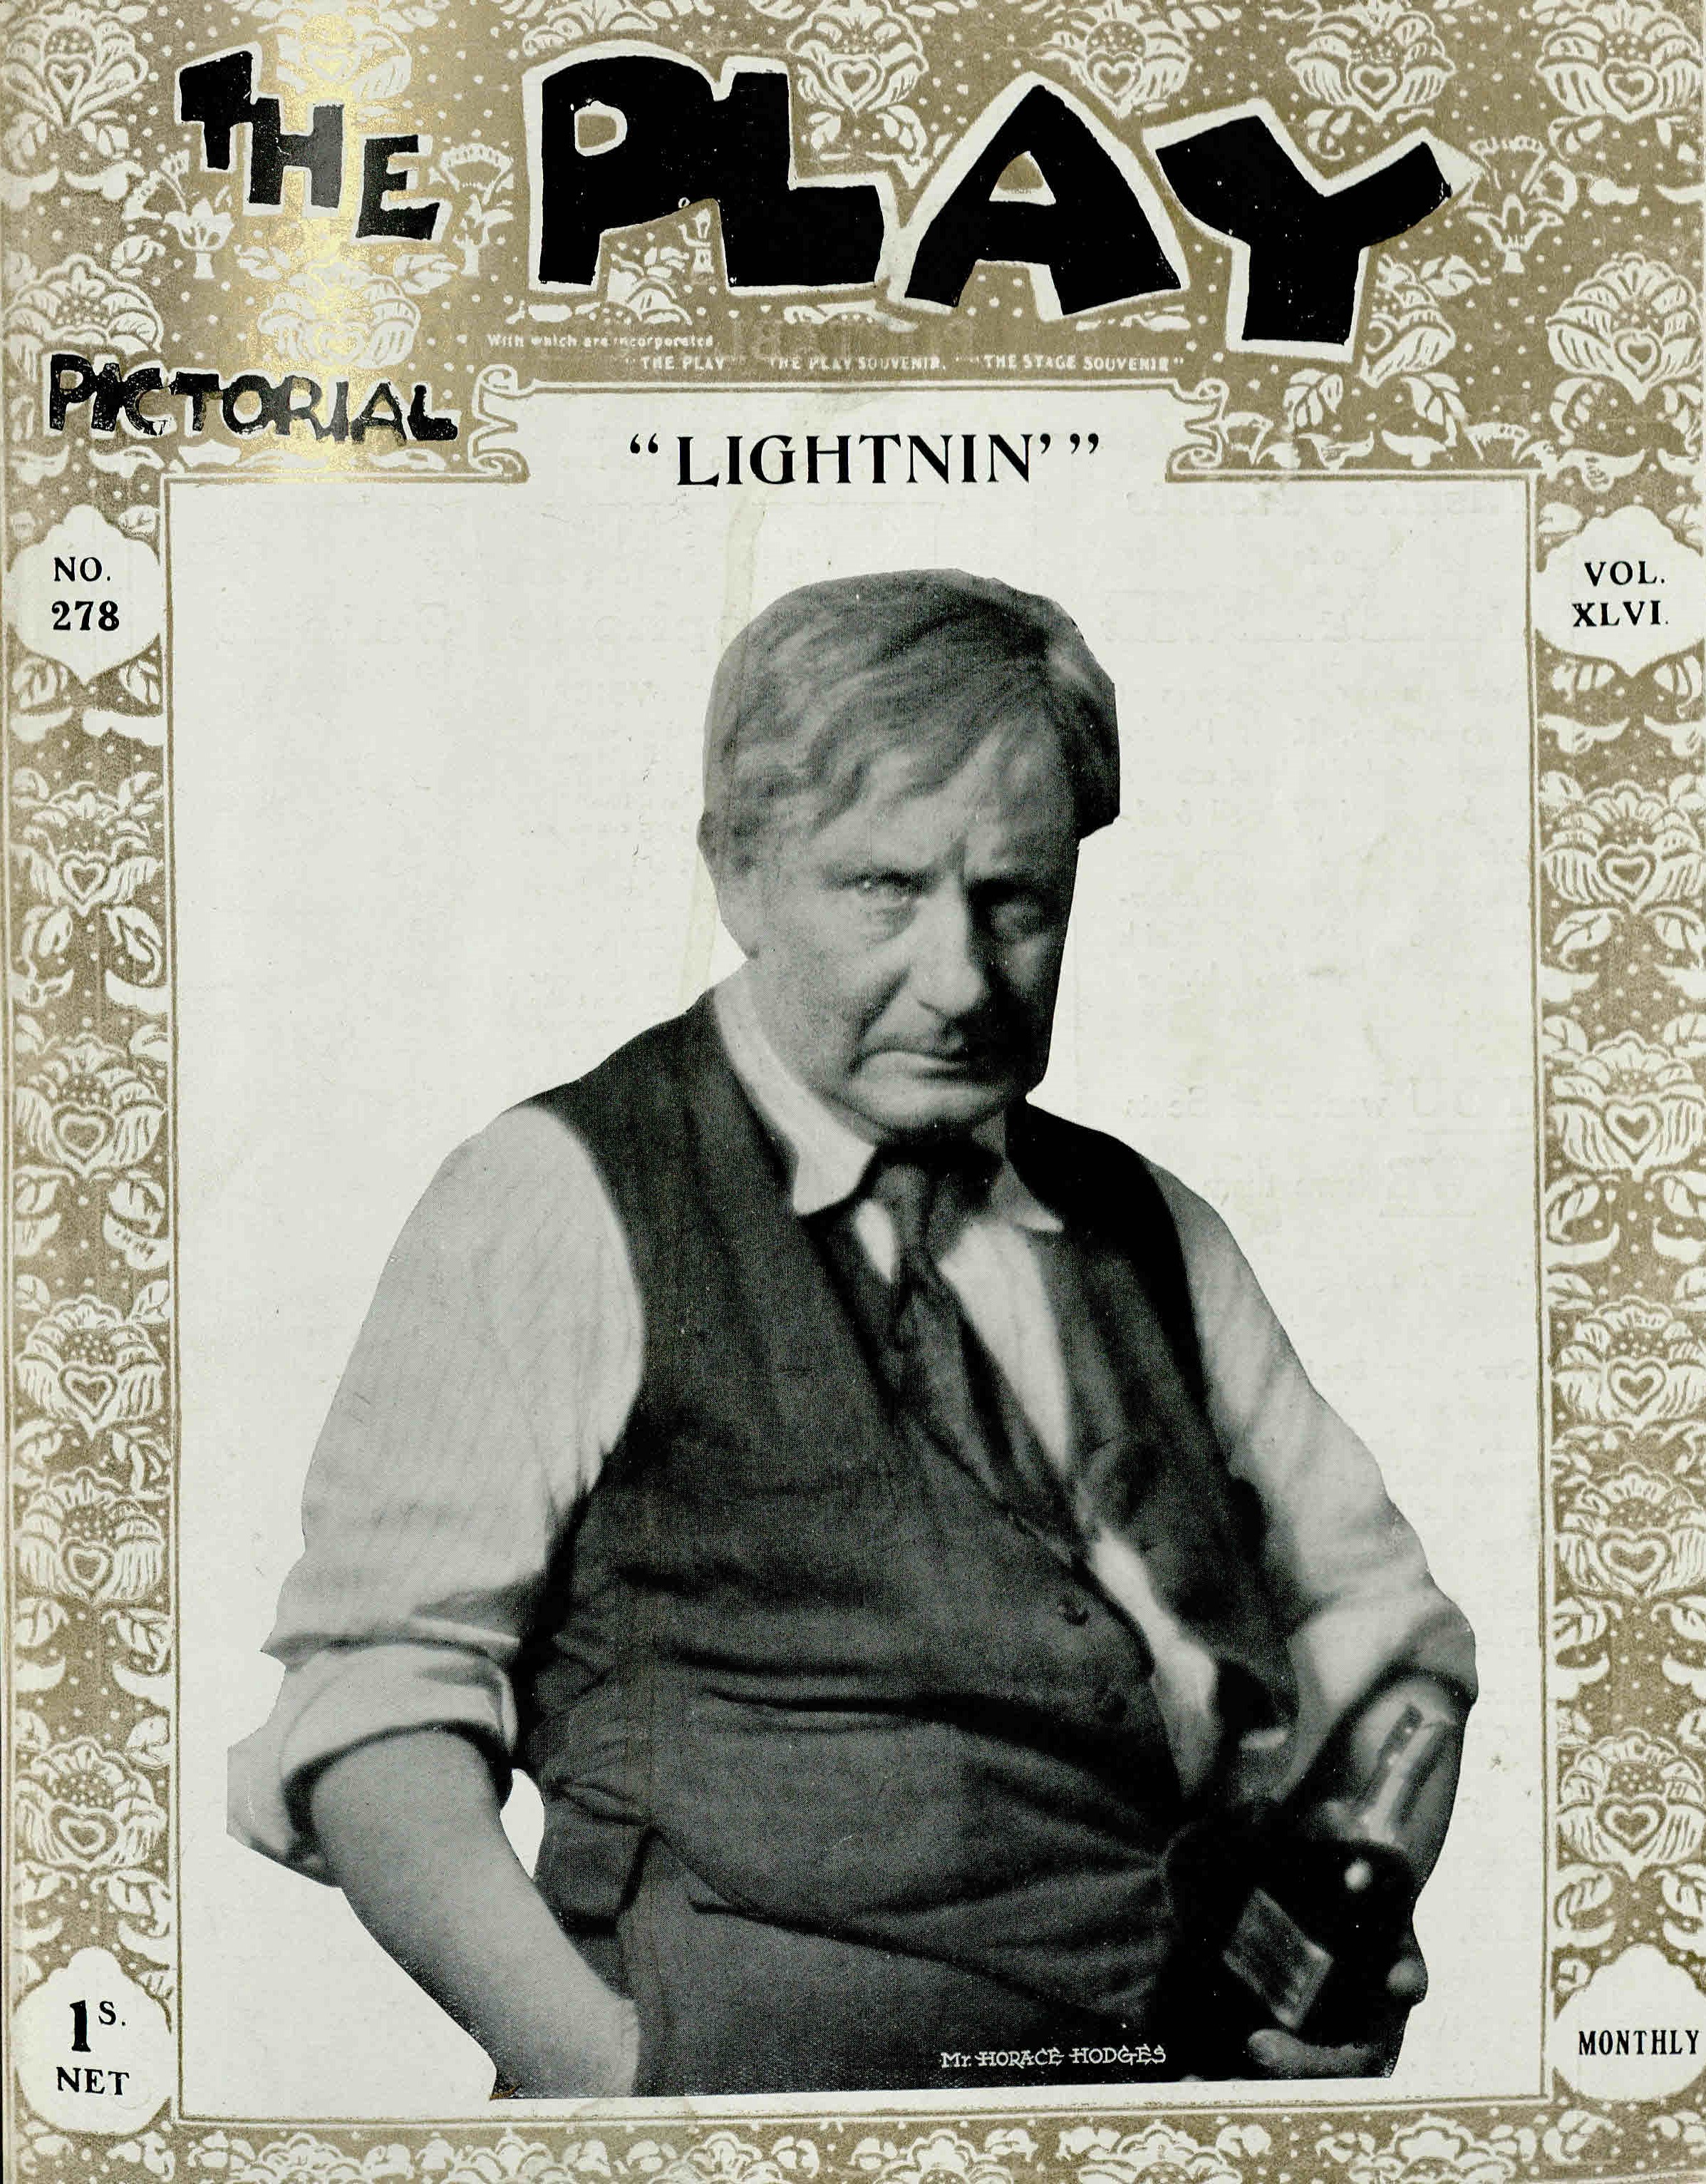 Front cover of Play Pictorial, featuring Lightnin